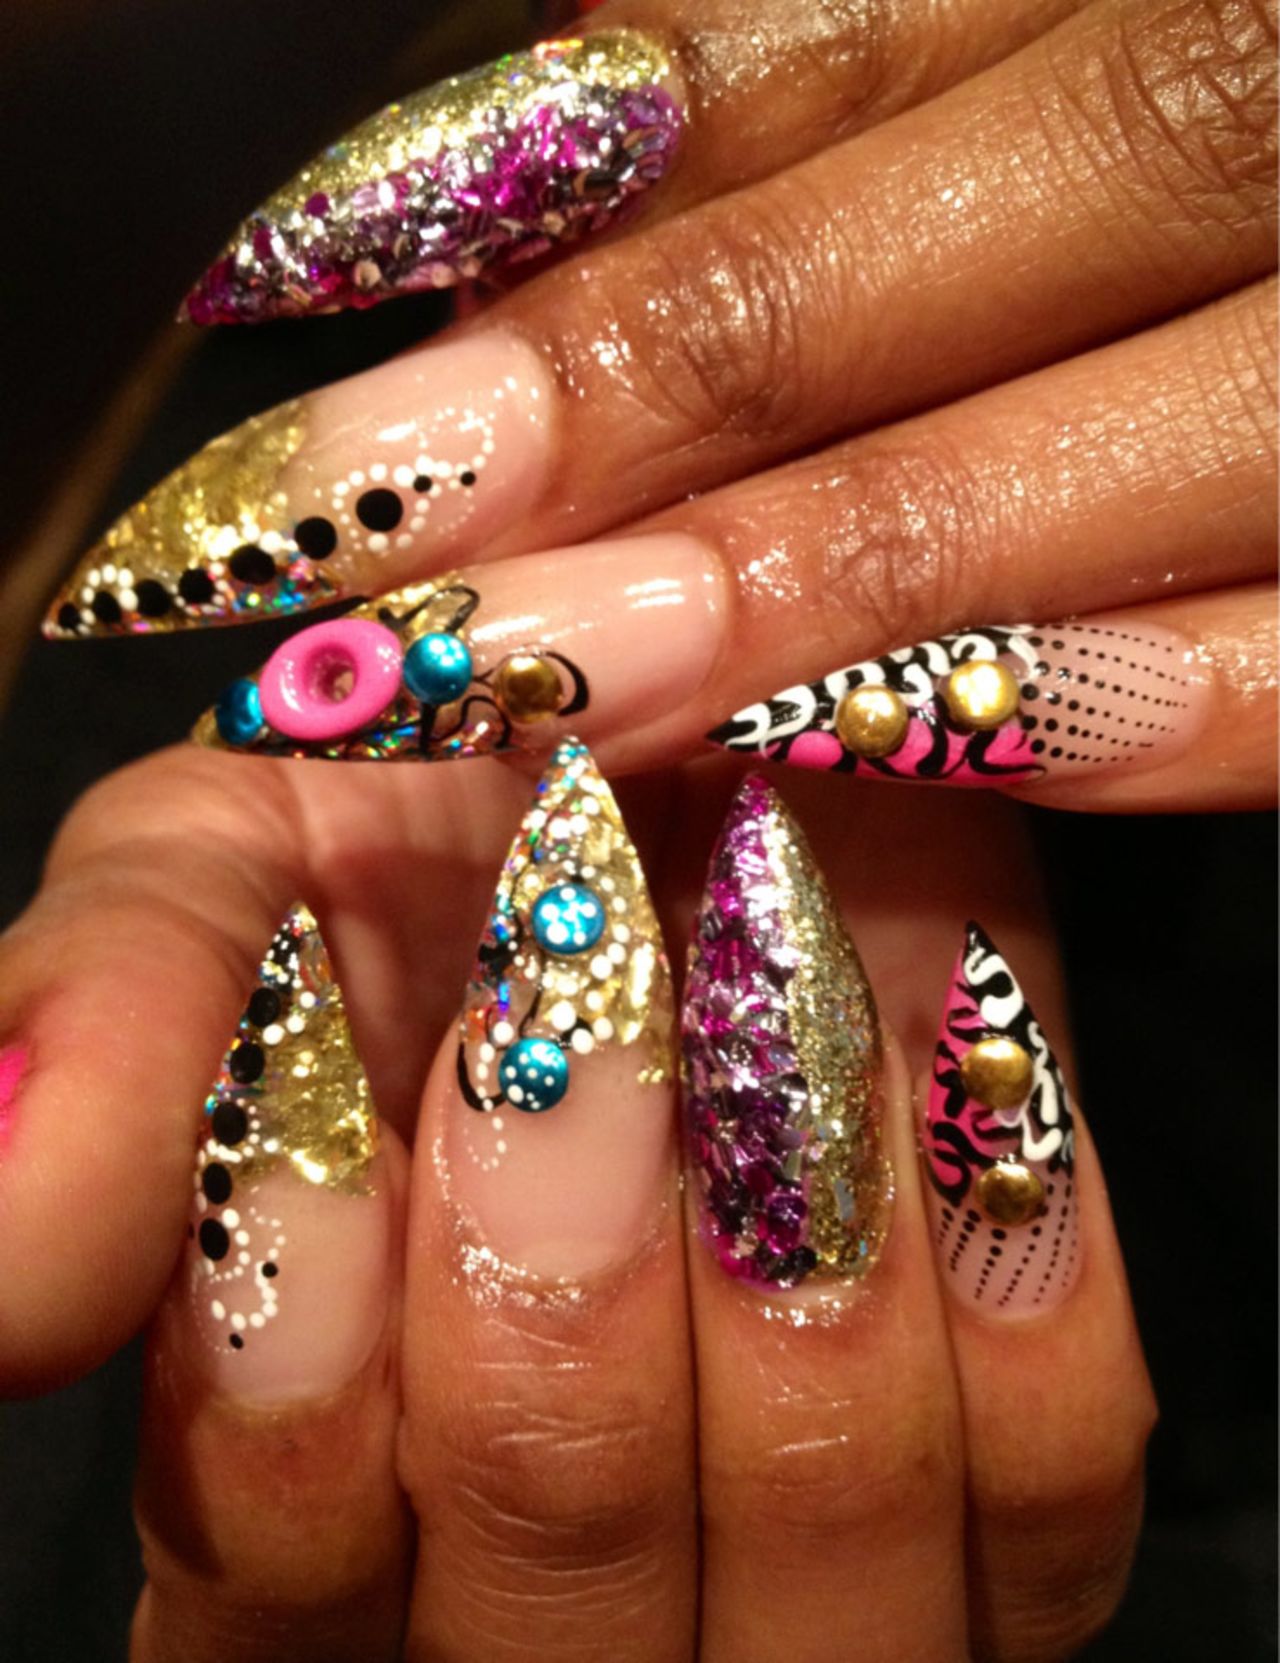 Nail technicians from across the country attend Tashina "Poochie" Green's classes on how to create safe, eye-catching nail art.